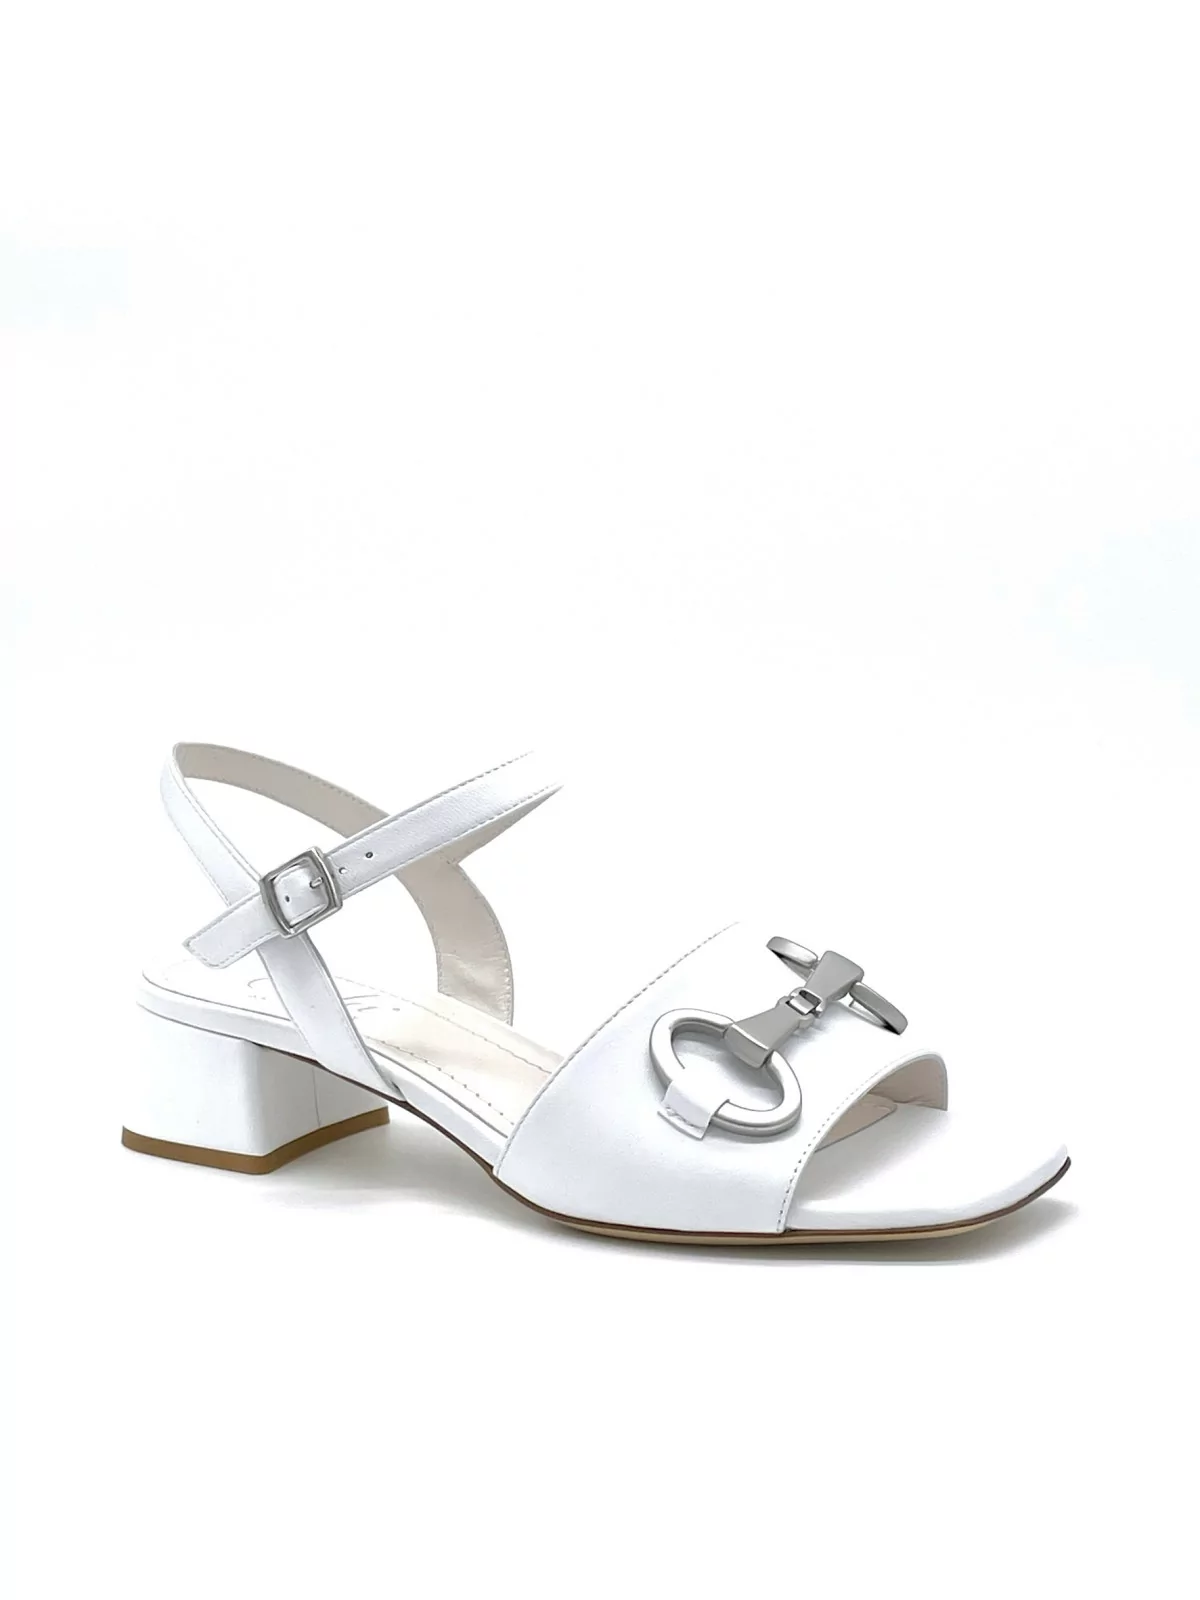 White leather sandal with silver accessory. Leather lining. Leather sole. 3,5 cm